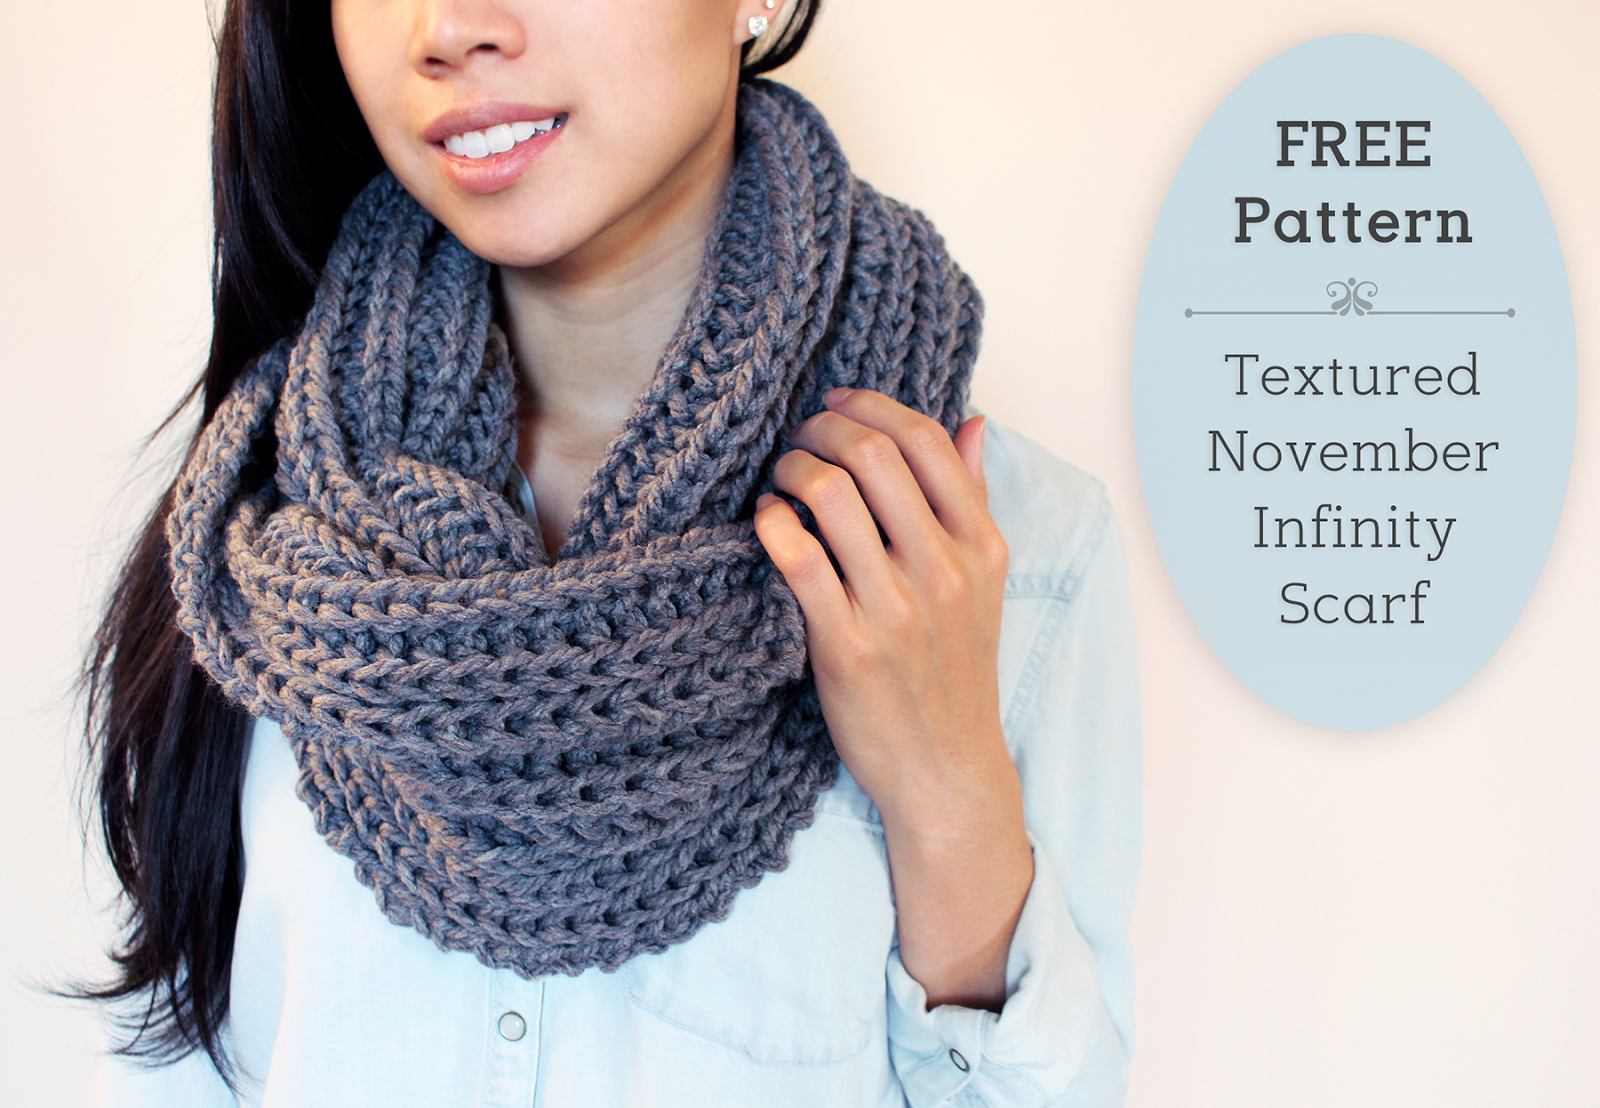 Knitting Pattern For Scarfs Purllin Textured November Infinity Scarf Free Pattern